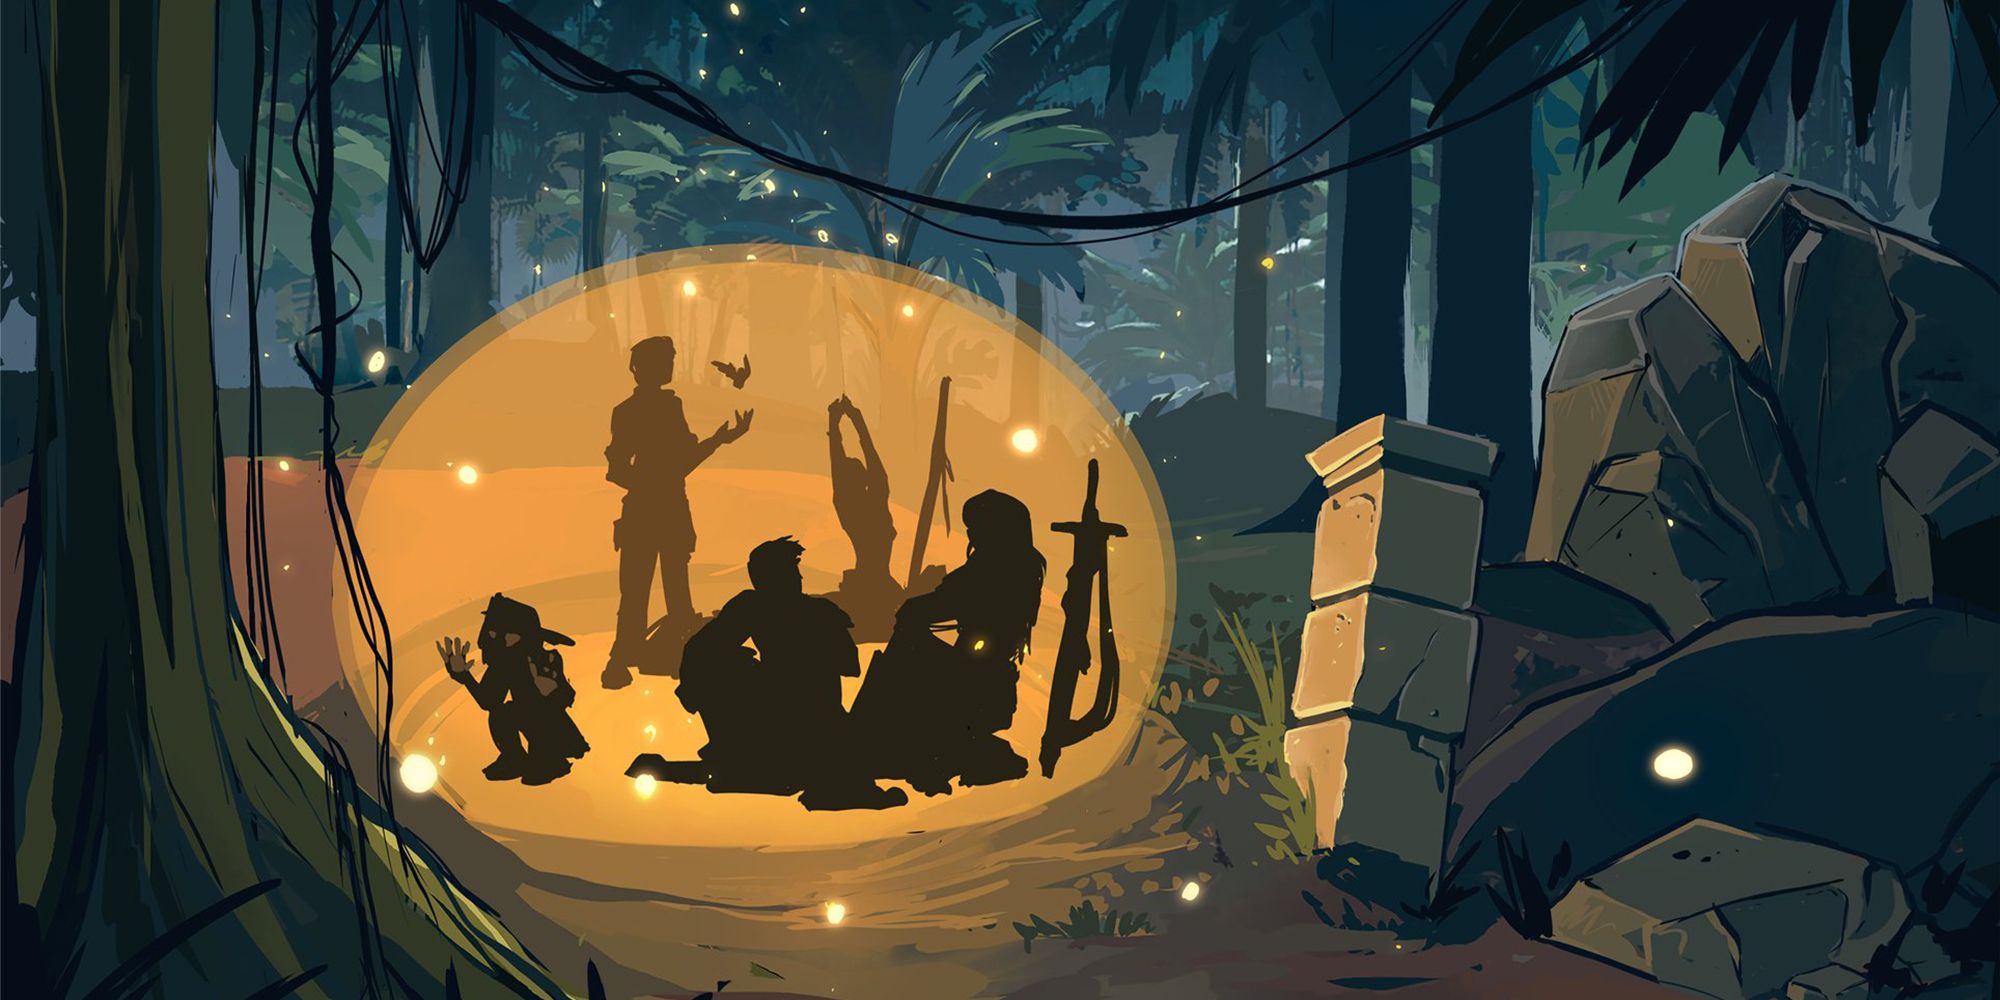 A group of adventurers resting in a glowing magical hut